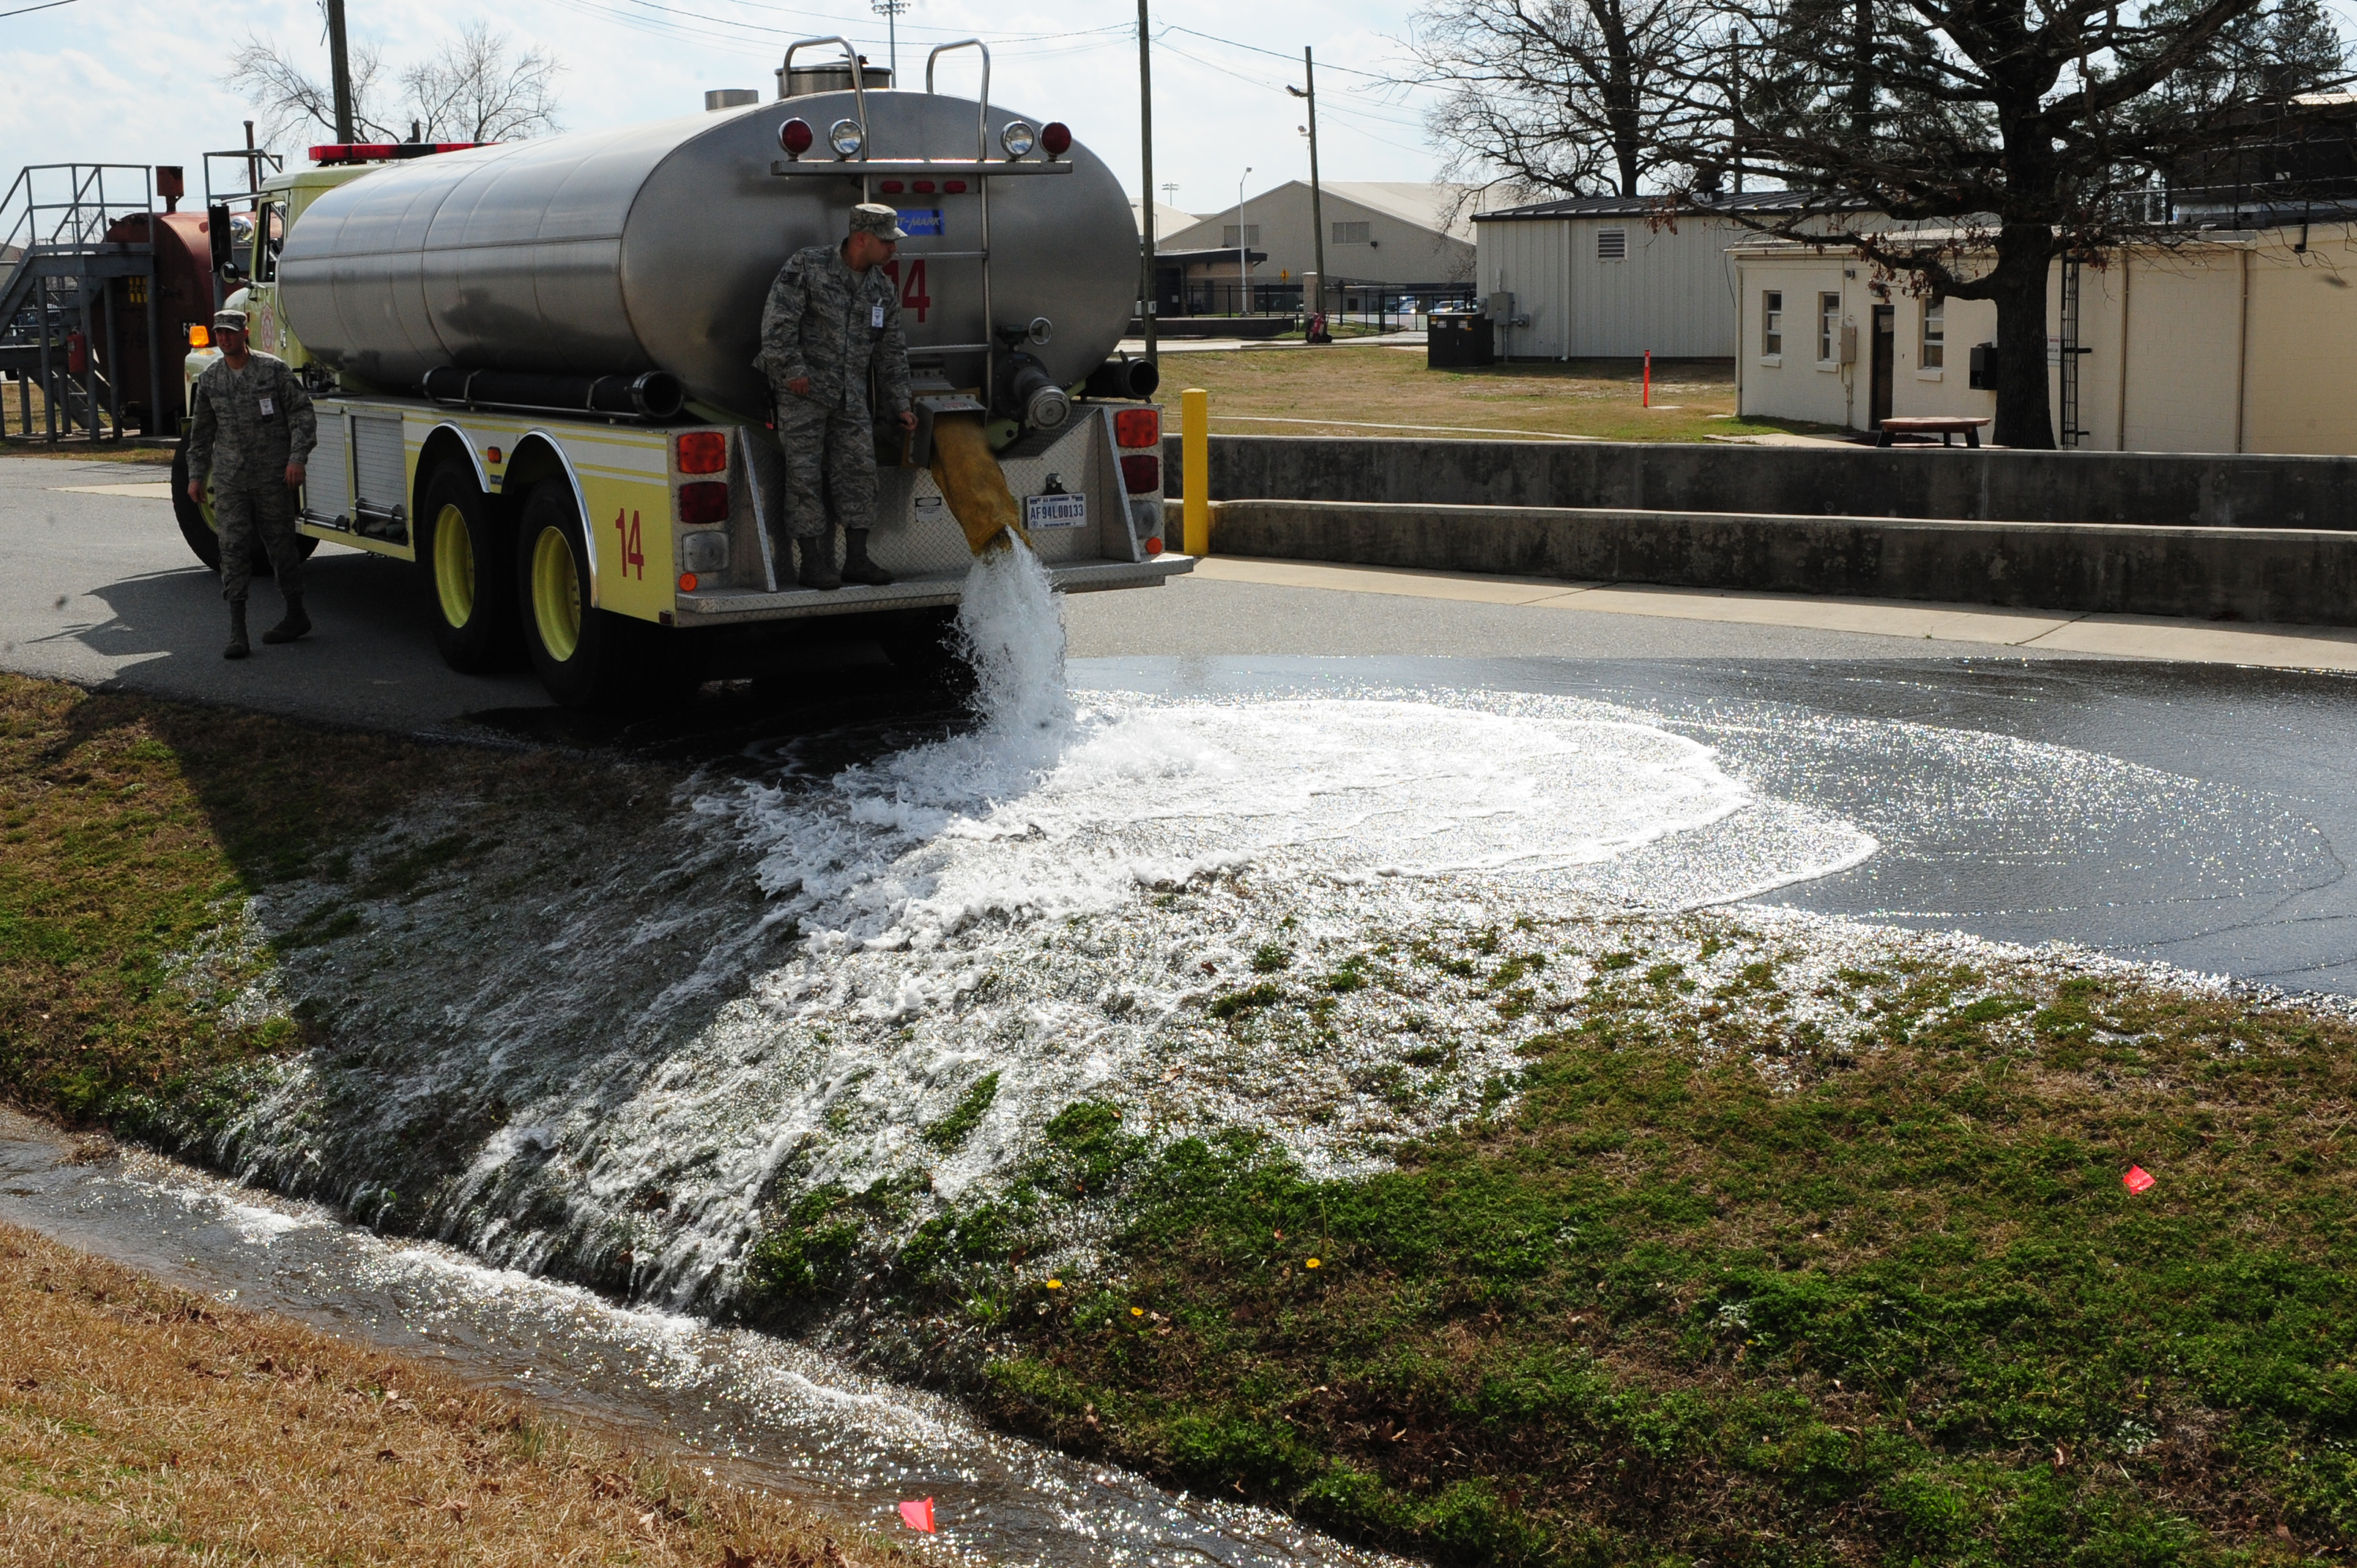 4th FW conducts fuel spill exercise > Seymour Johnson Air Force Base